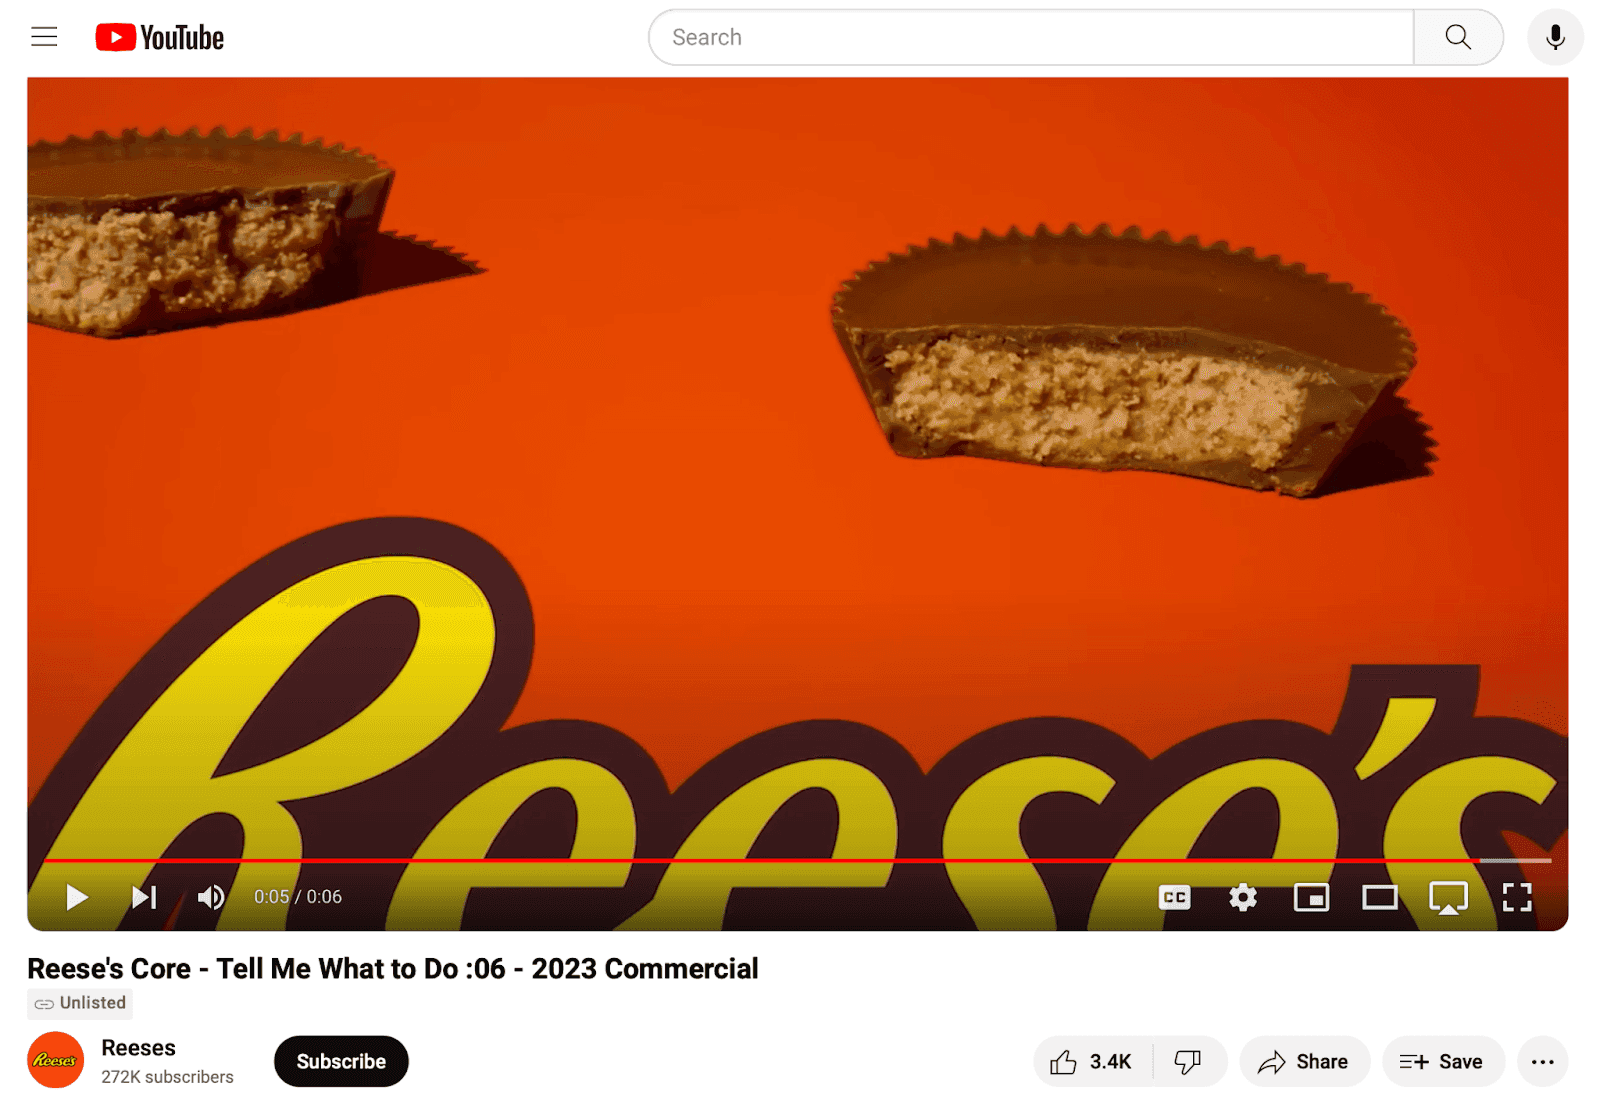 youtube video with a close up of reese's peanut butter cups with an orange background